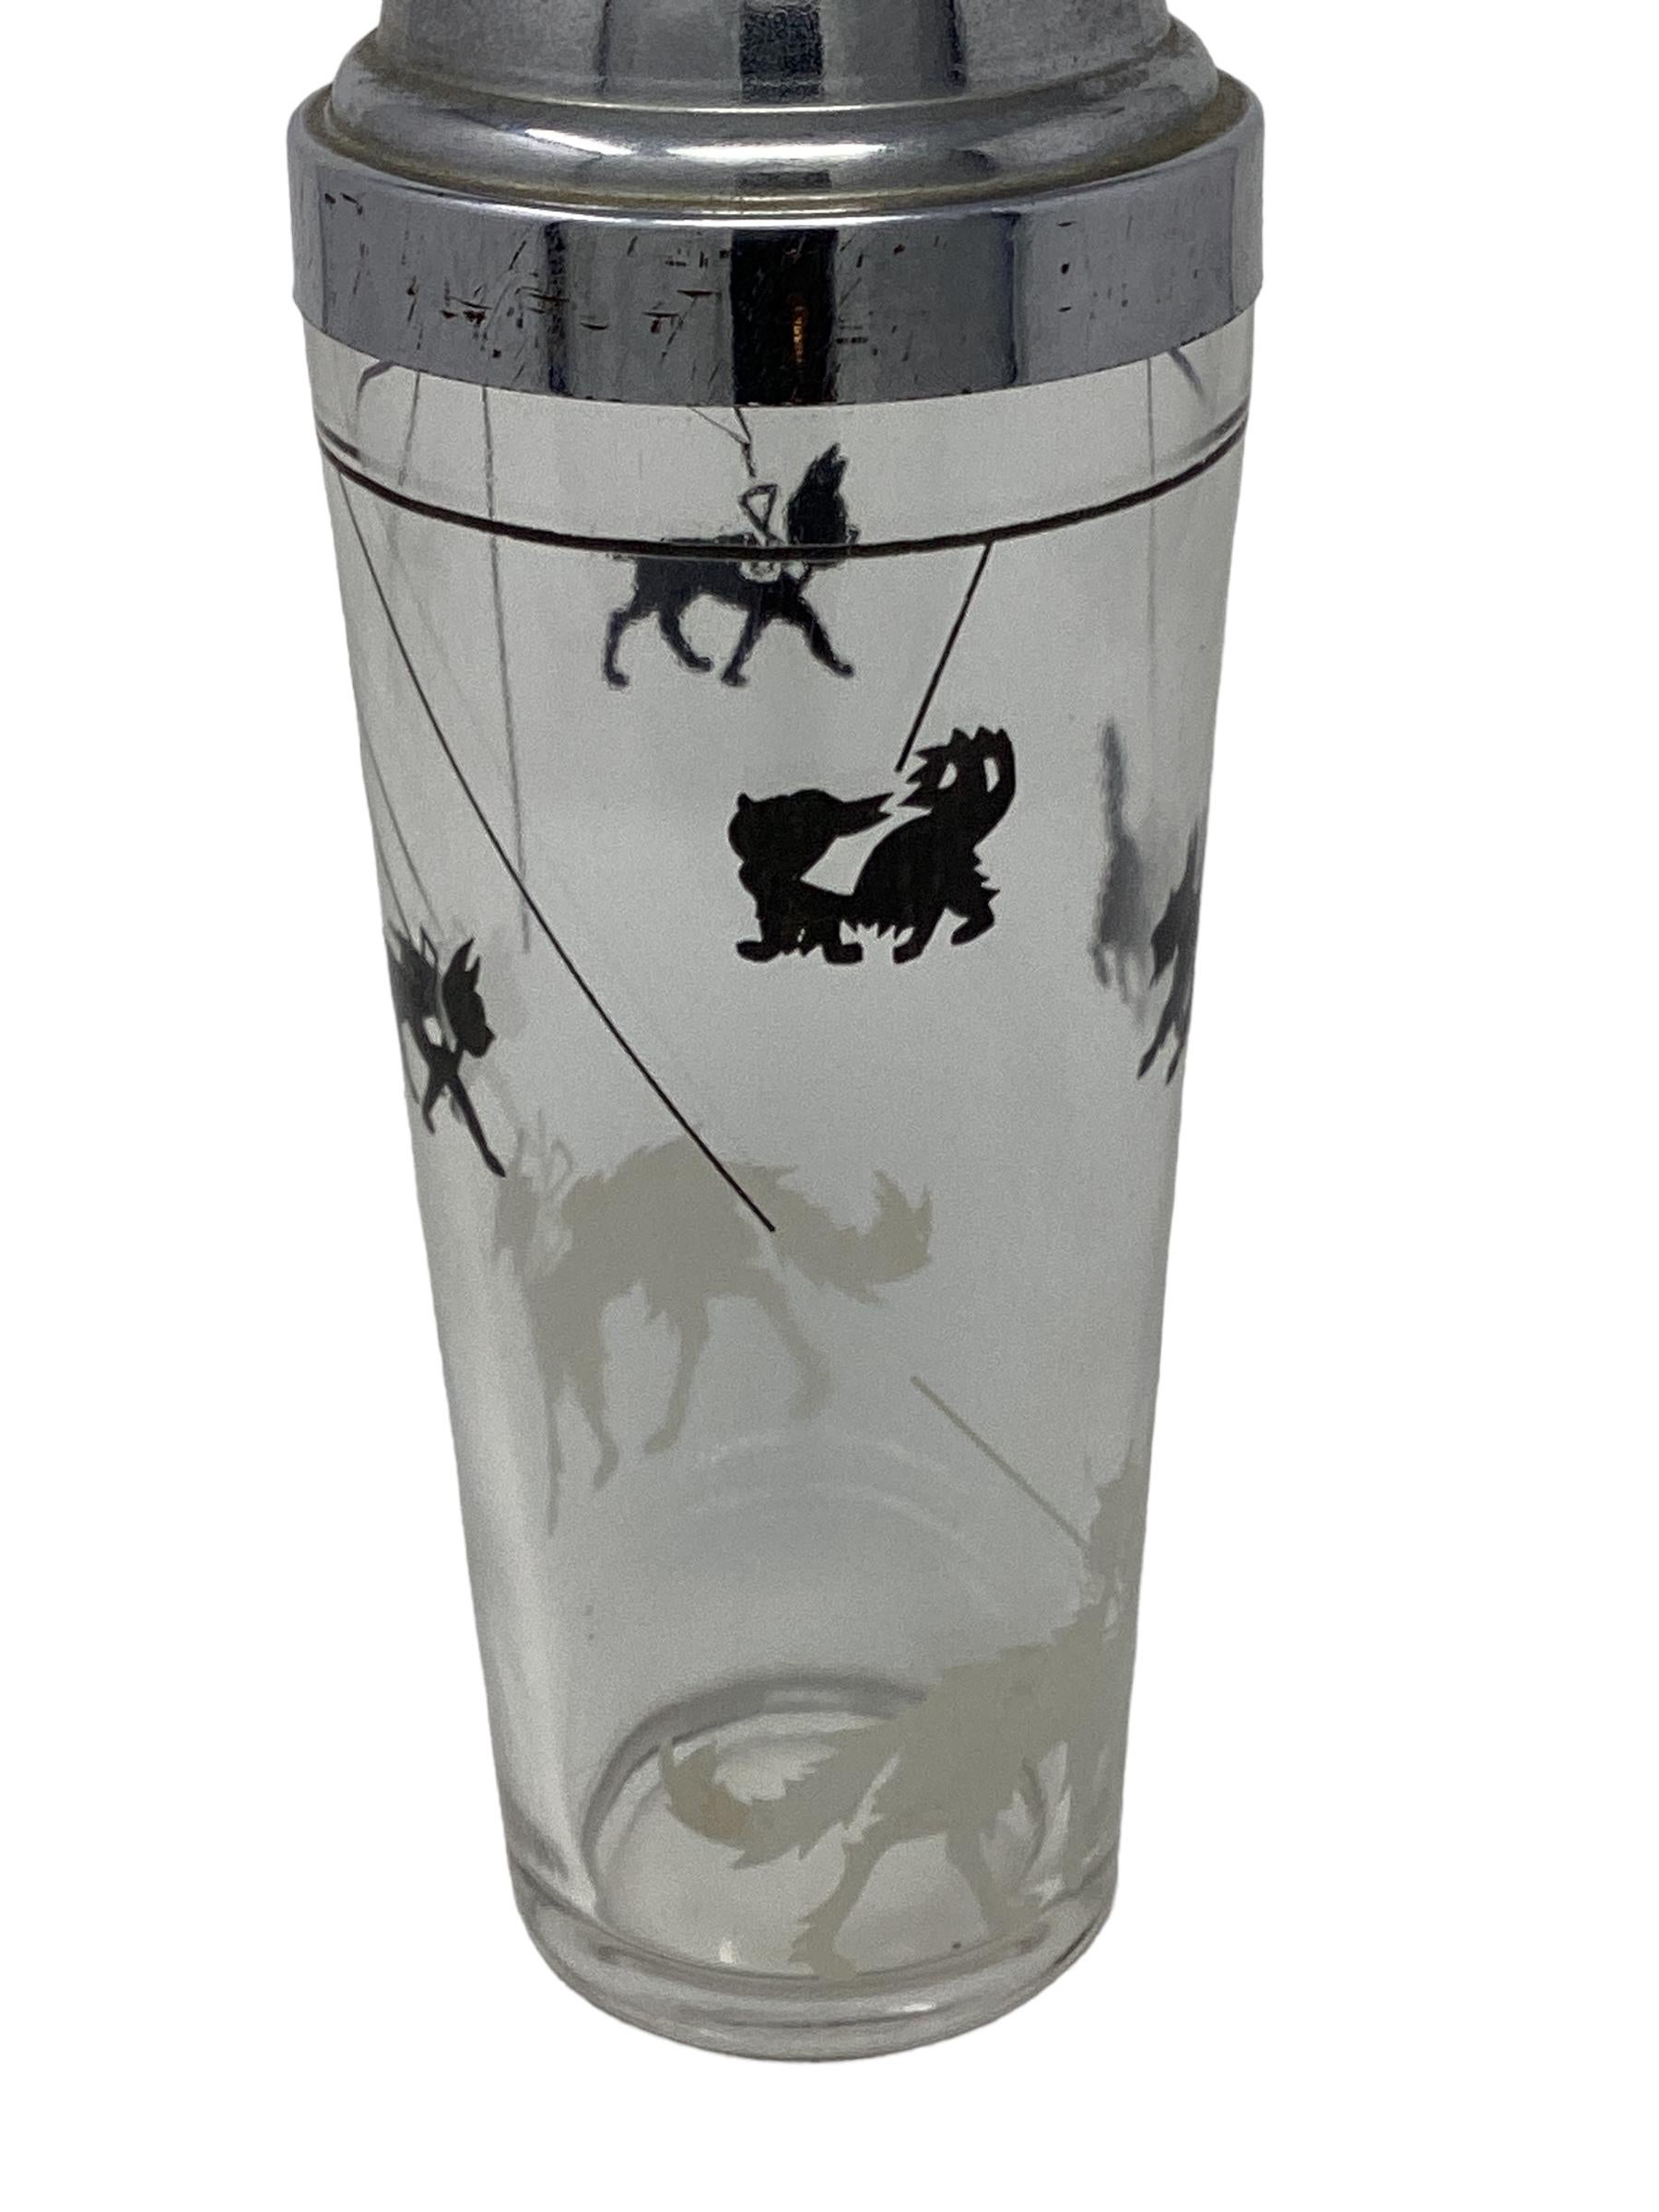 Glass Art Deco Hazel-Atlas Cocktail Shaker with Leashed Dogs For Sale